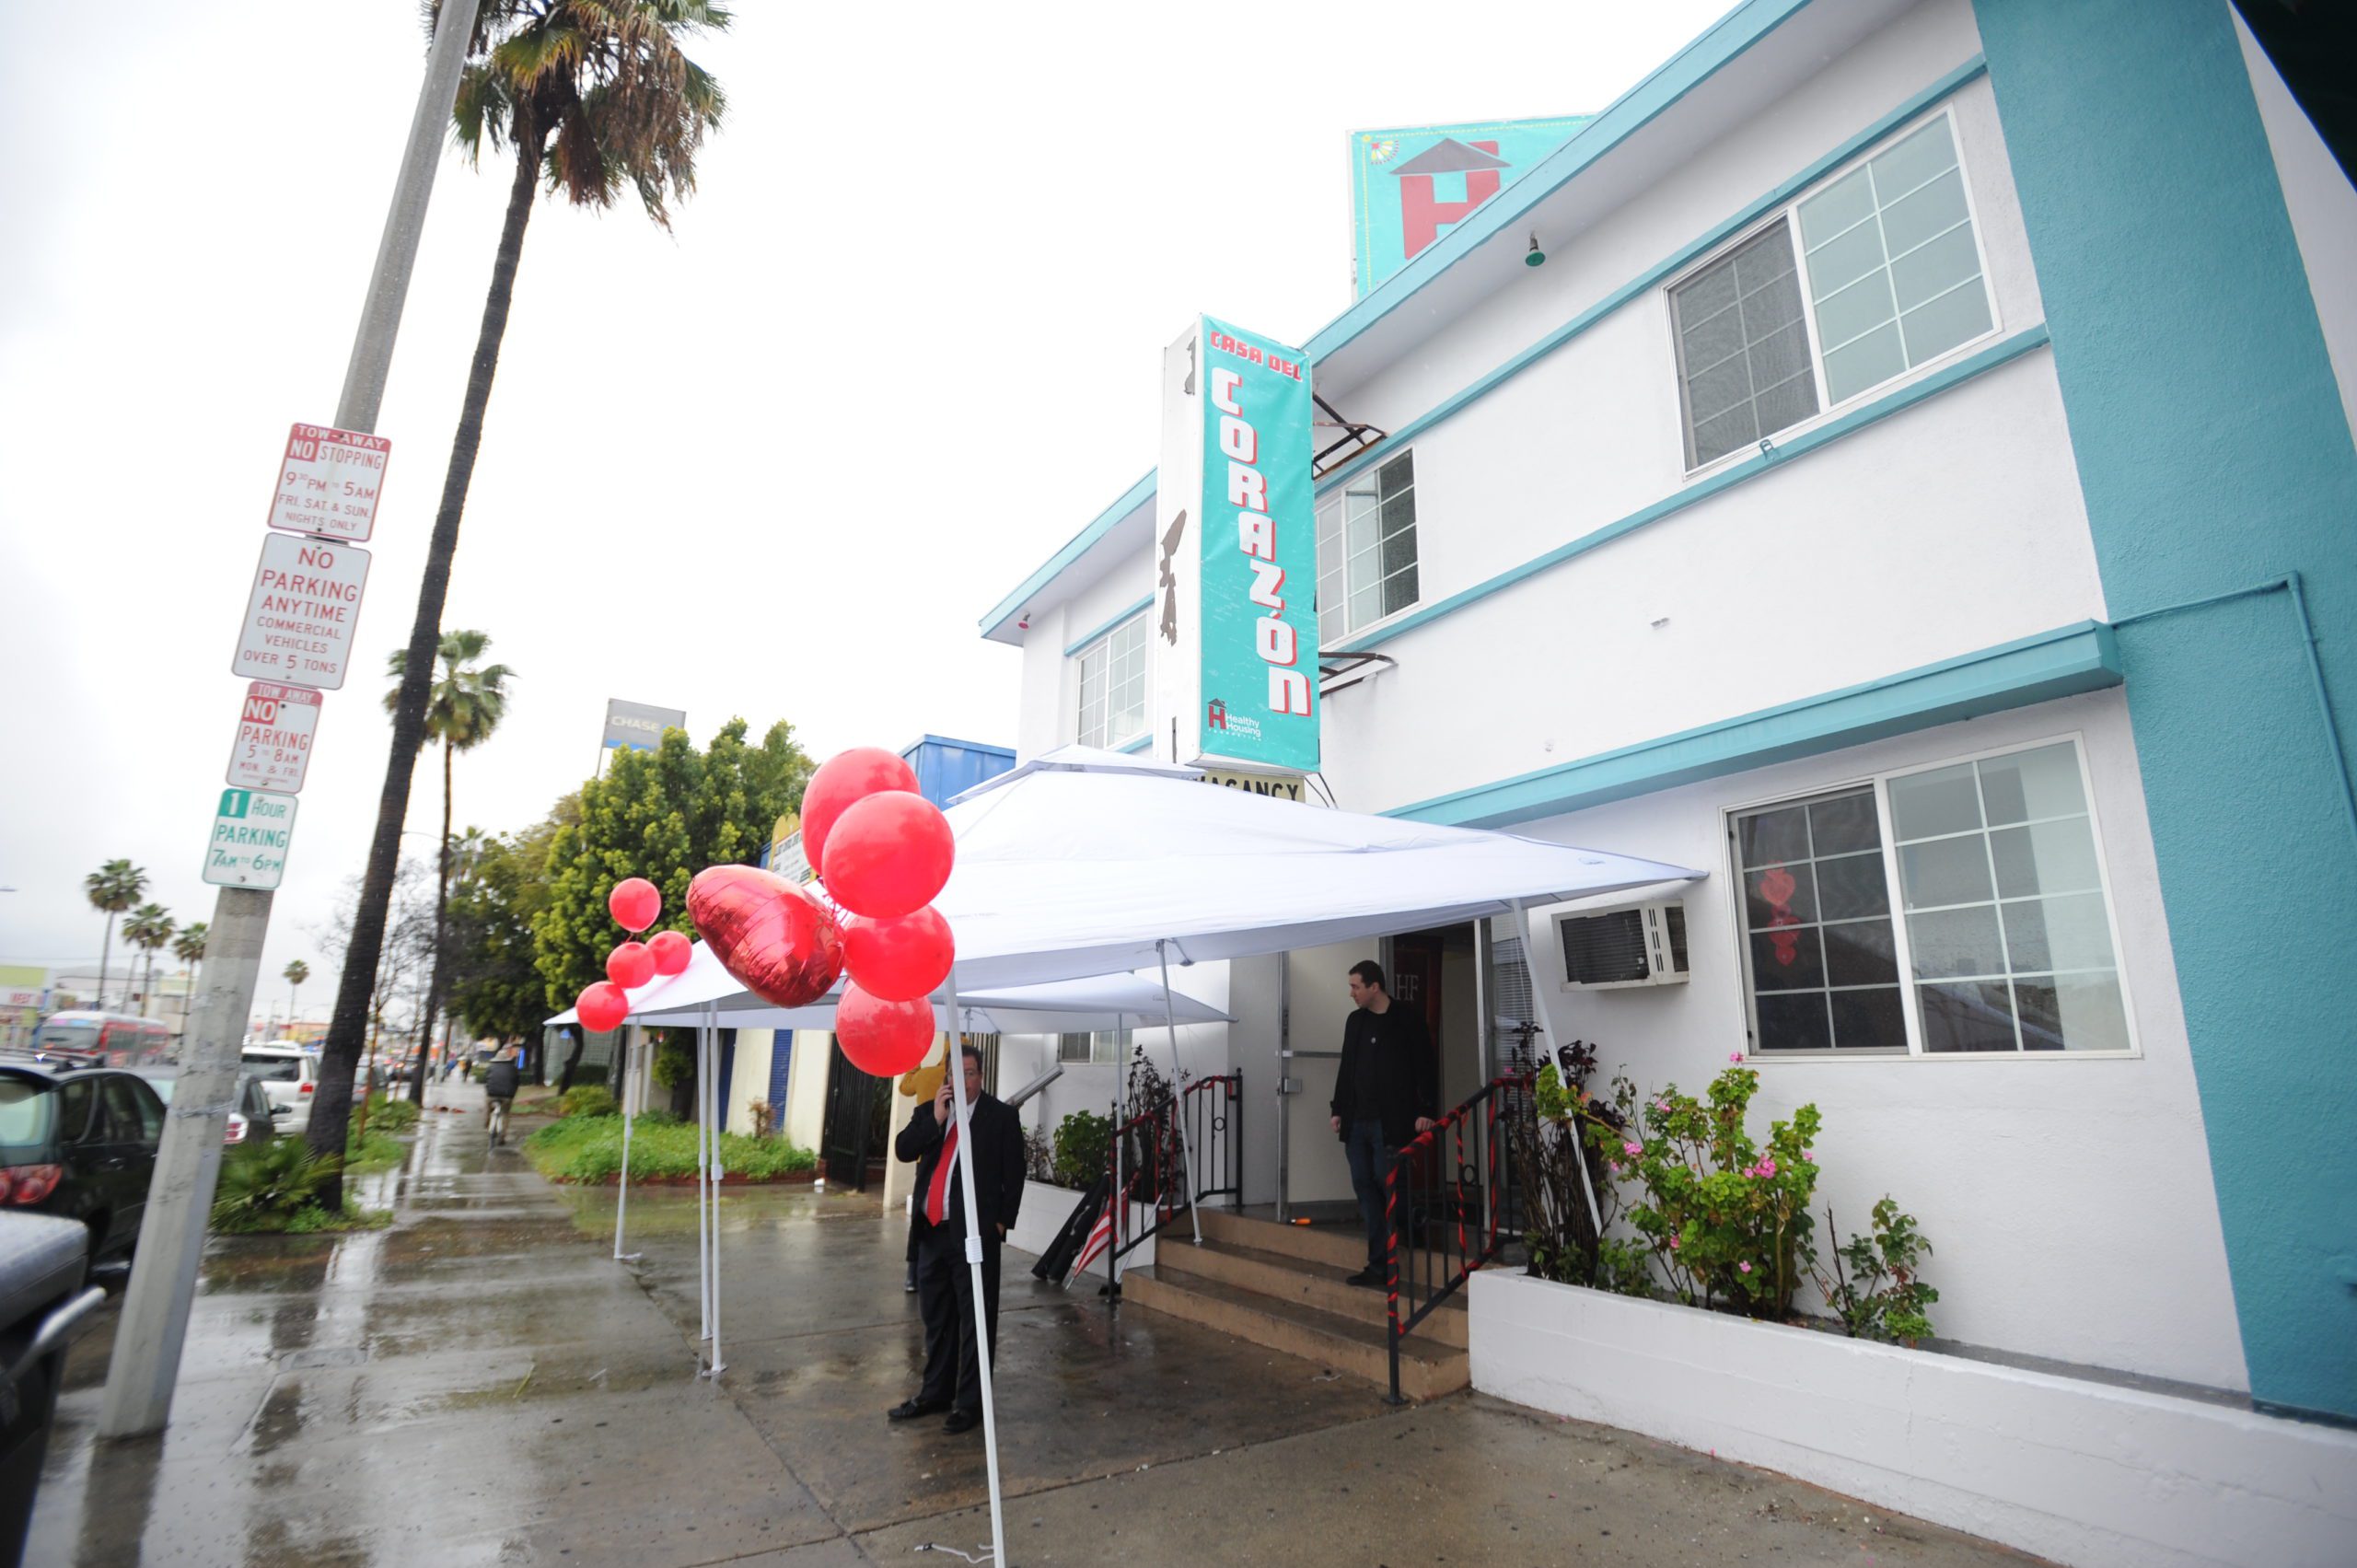 AHF Healthy Housing Foundation's First Anniversary and East L.A. Dedication